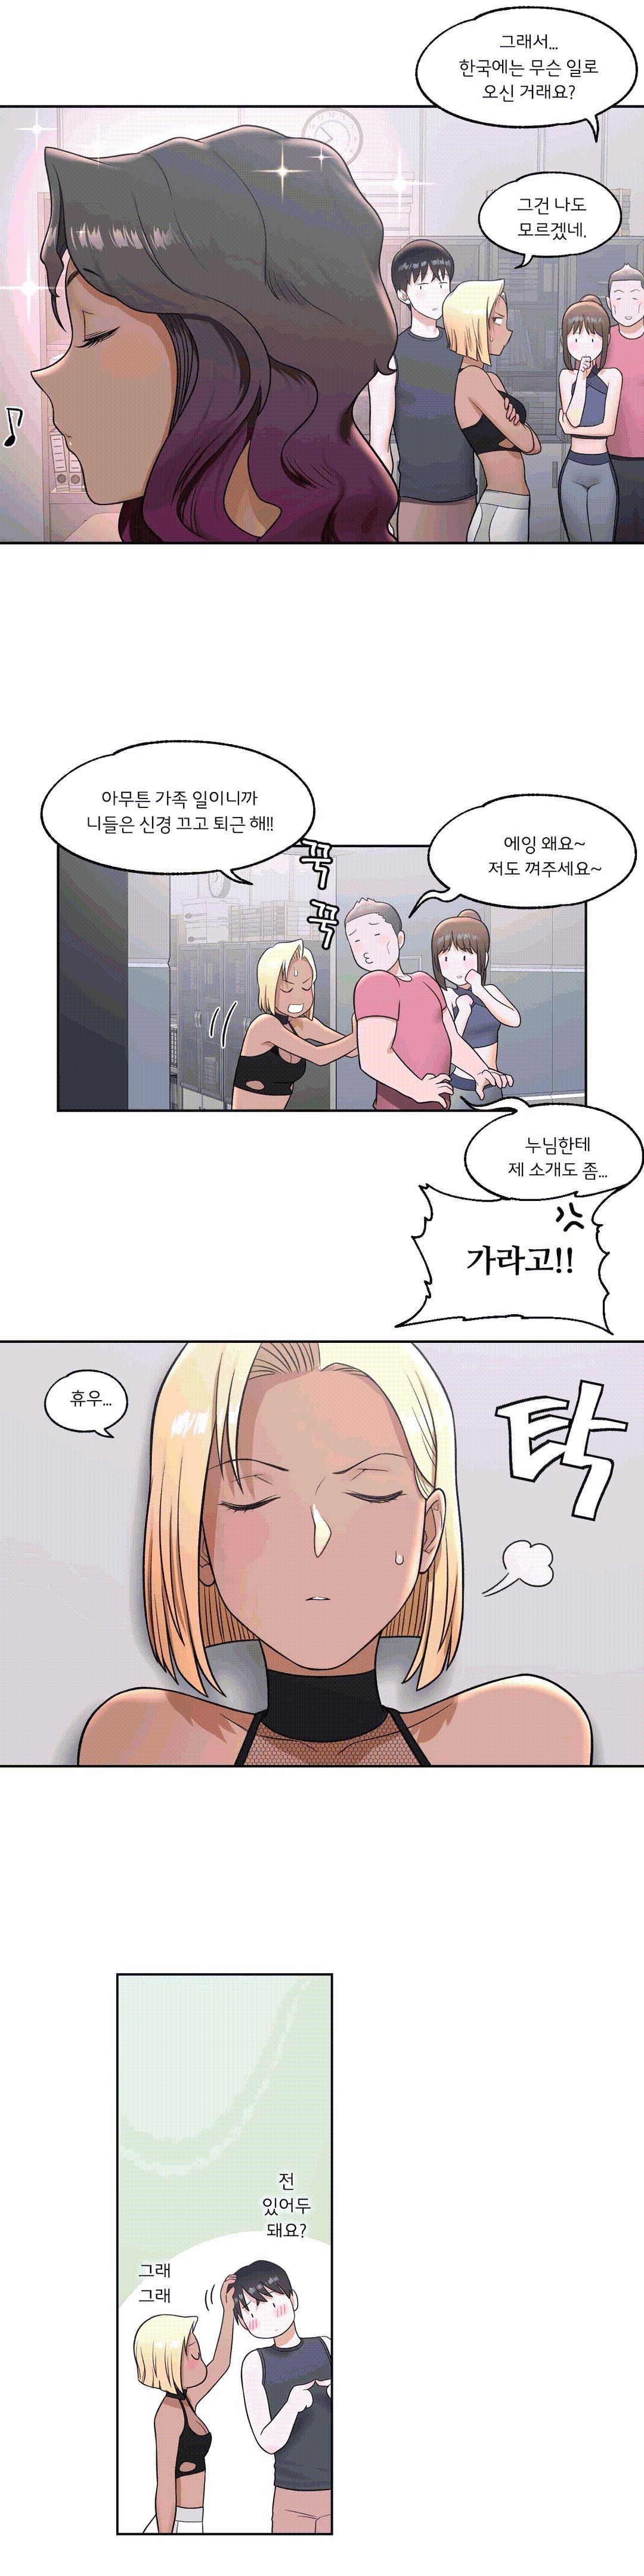 Sexercise Raw - Chapter 37 Page 7